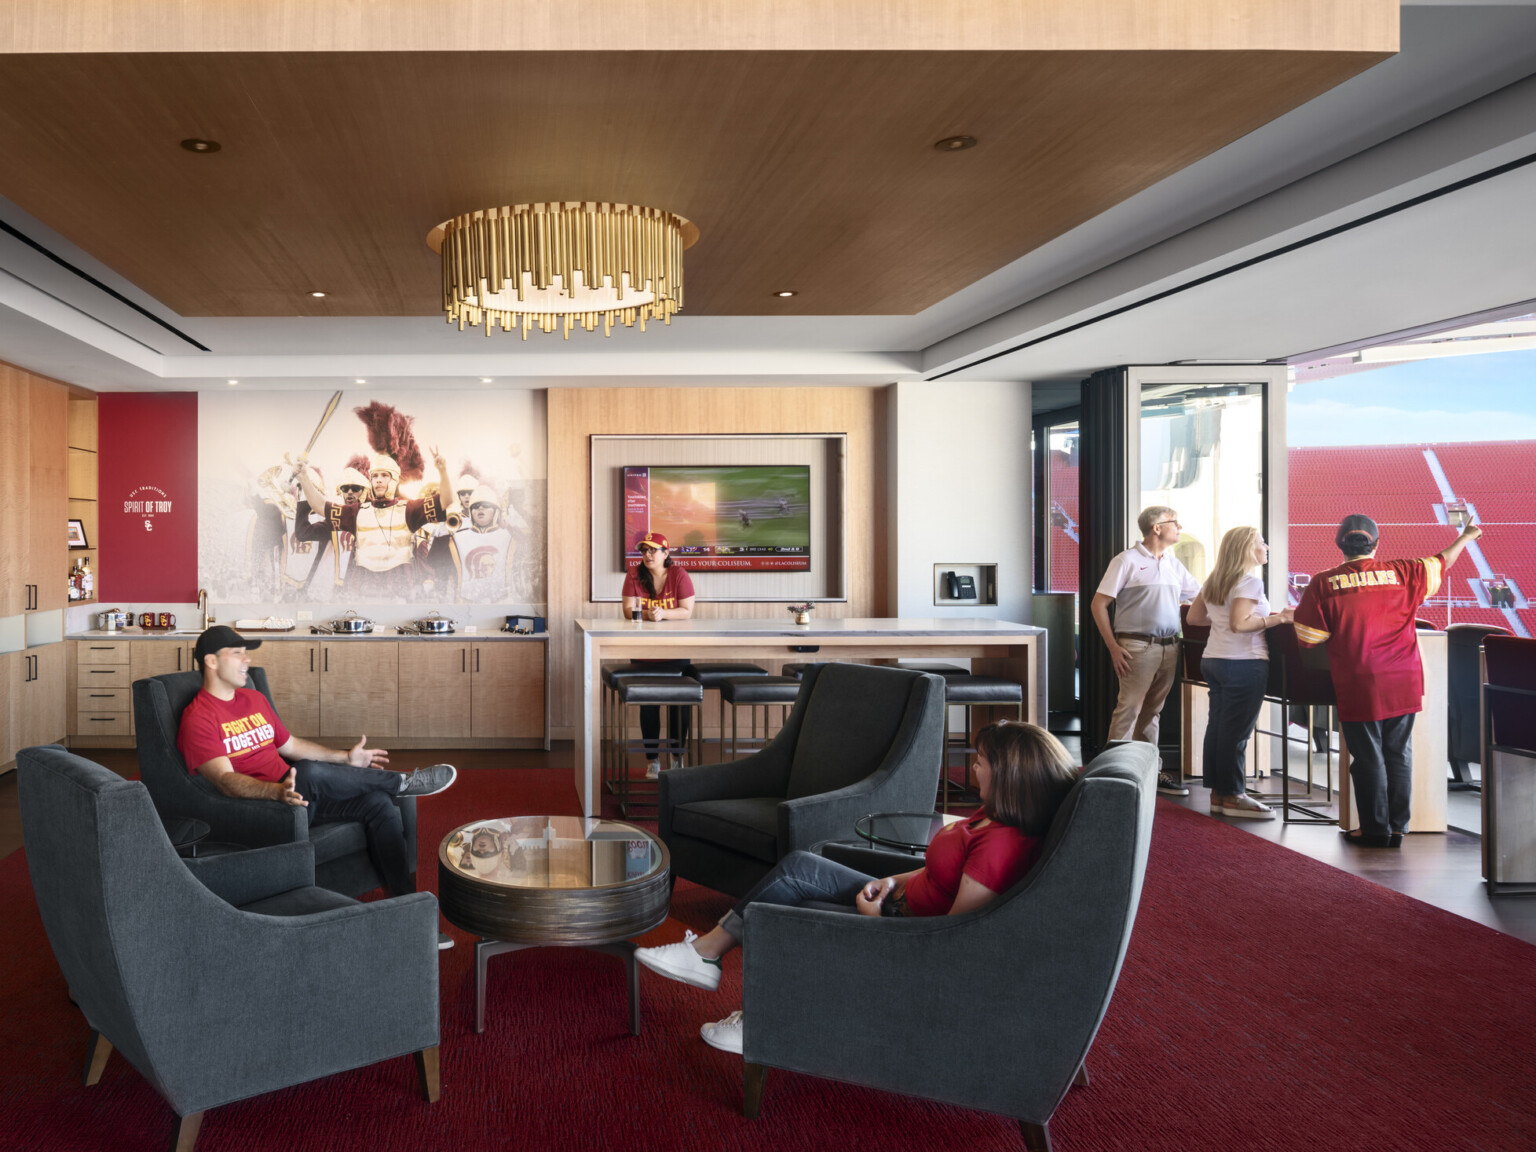 Private box in stadium with red carpet and gold chandelier. Flexible wall folds open facing field. Counter space and seating